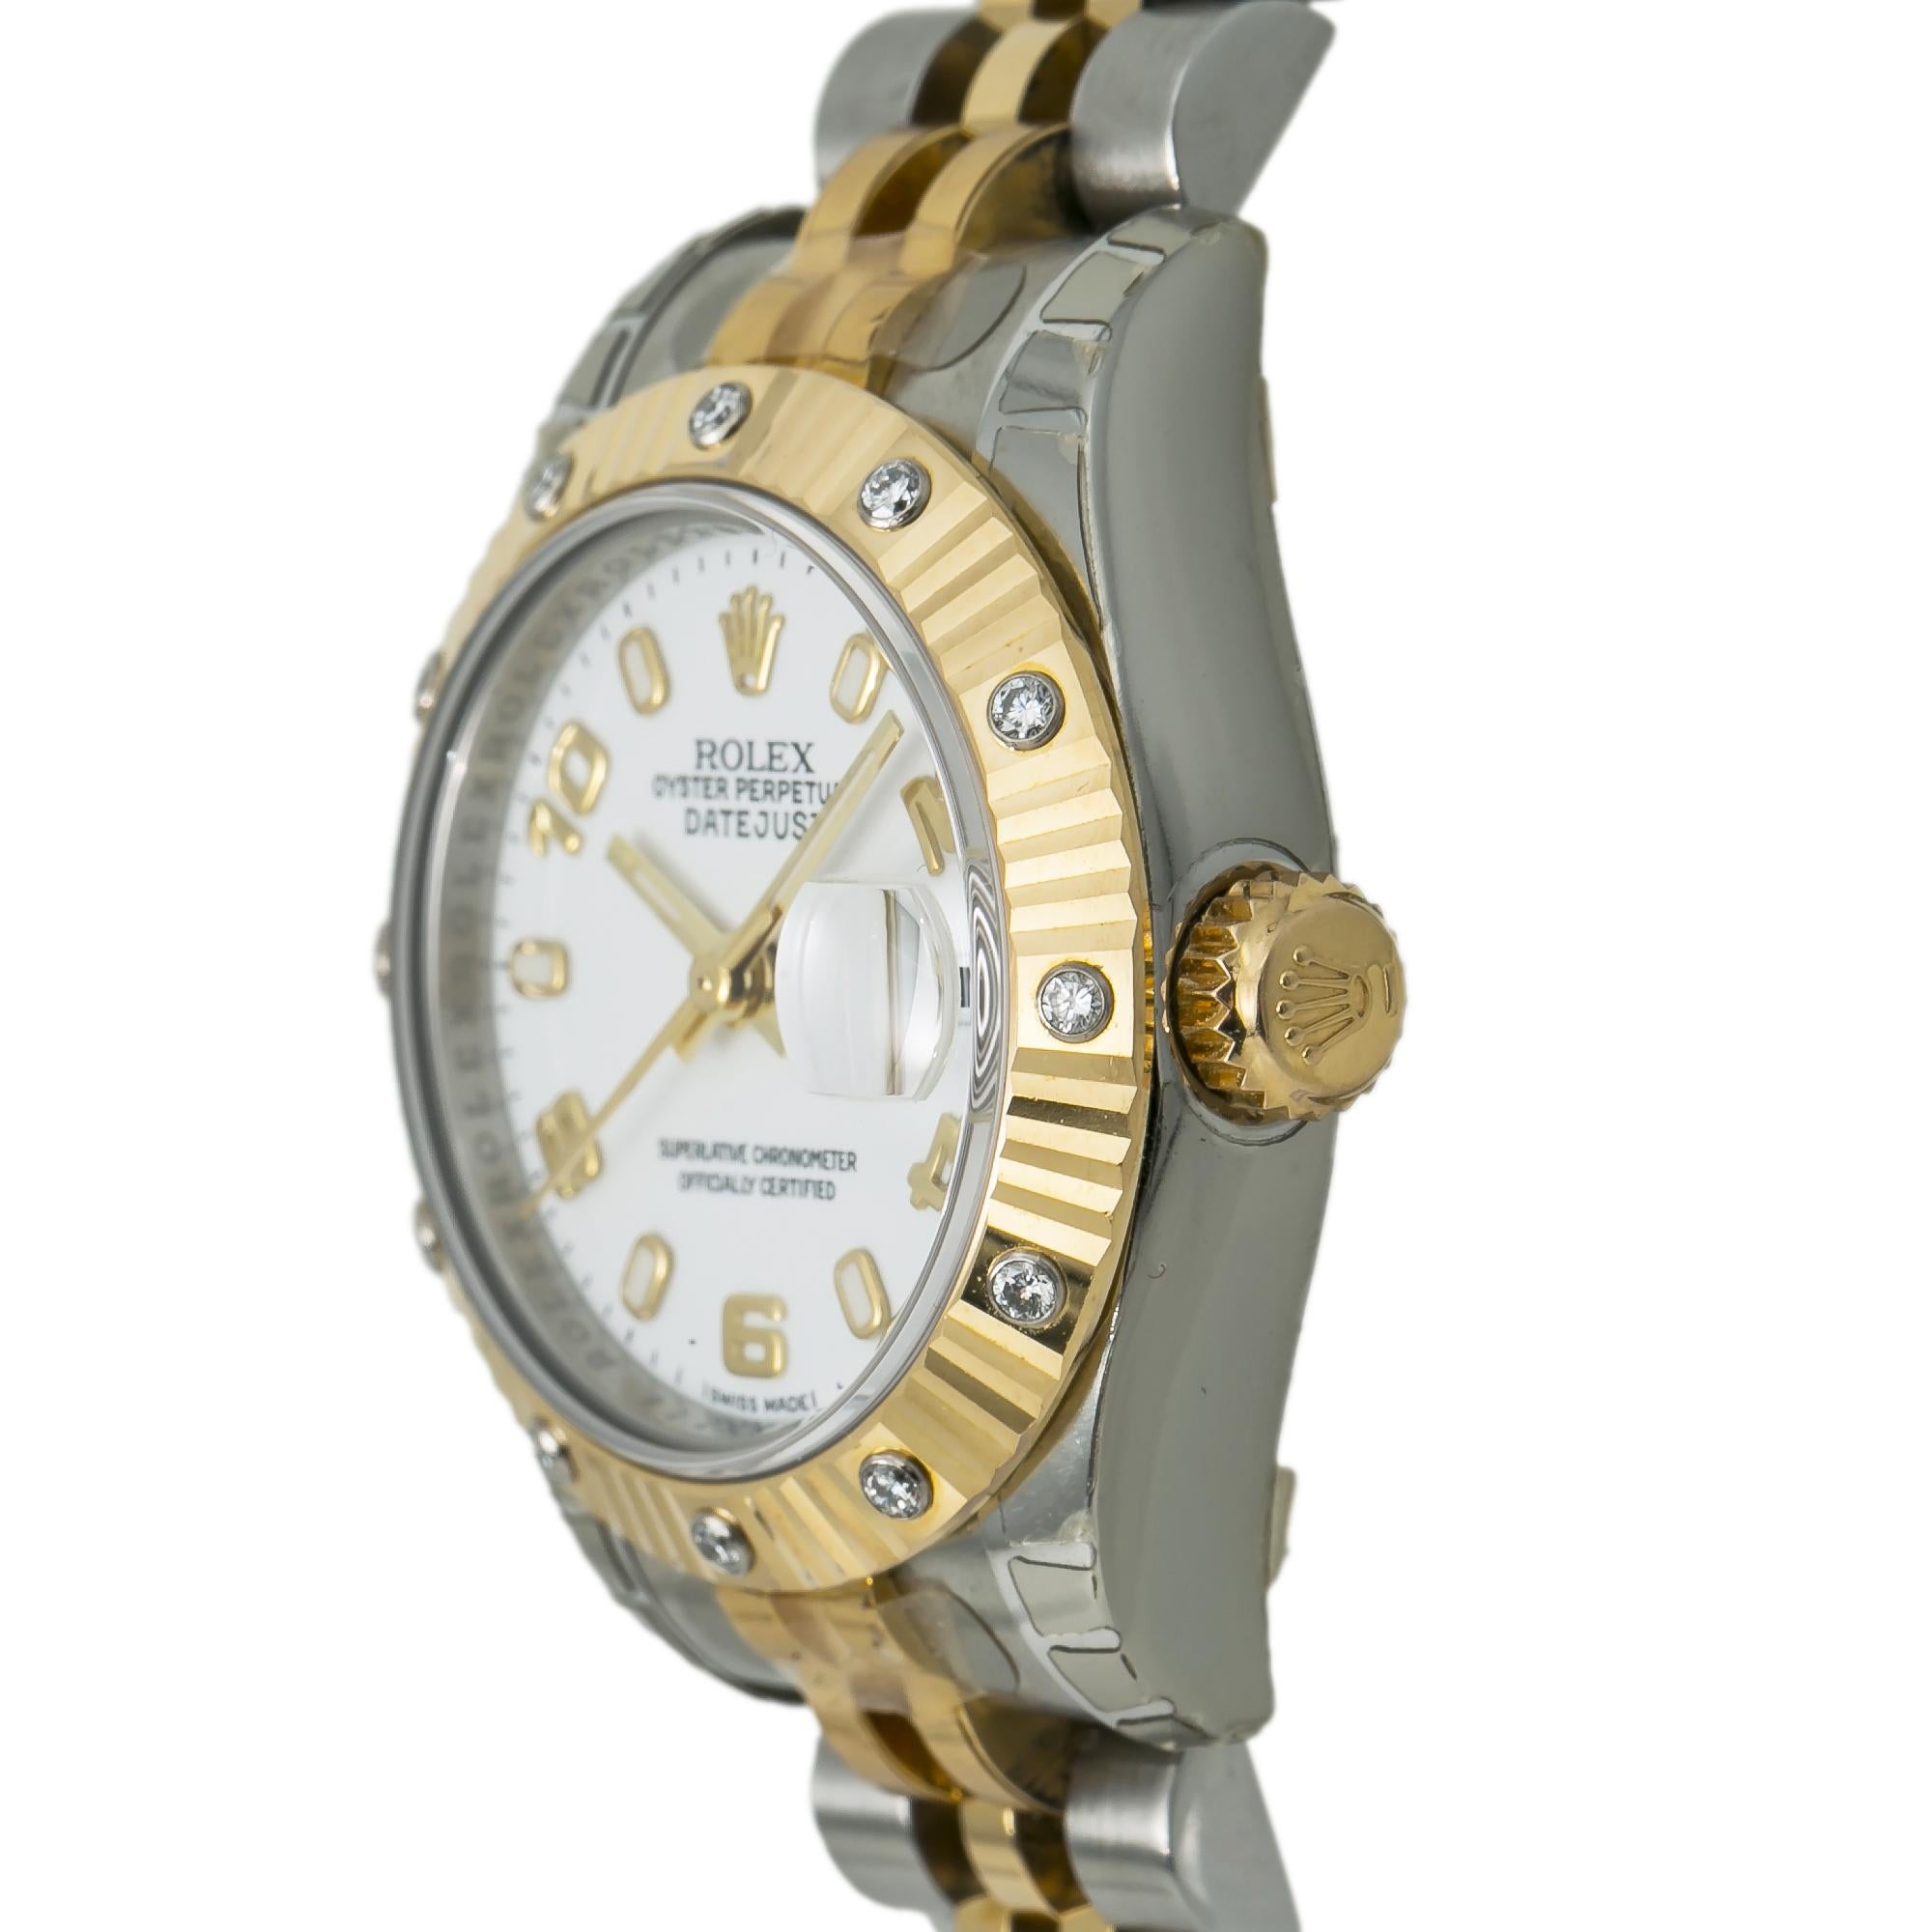 Contemporary Rolex Datejust 179313 Automatic Watch W/Papers 18K Two-Tone Diamond Bezel For Sale